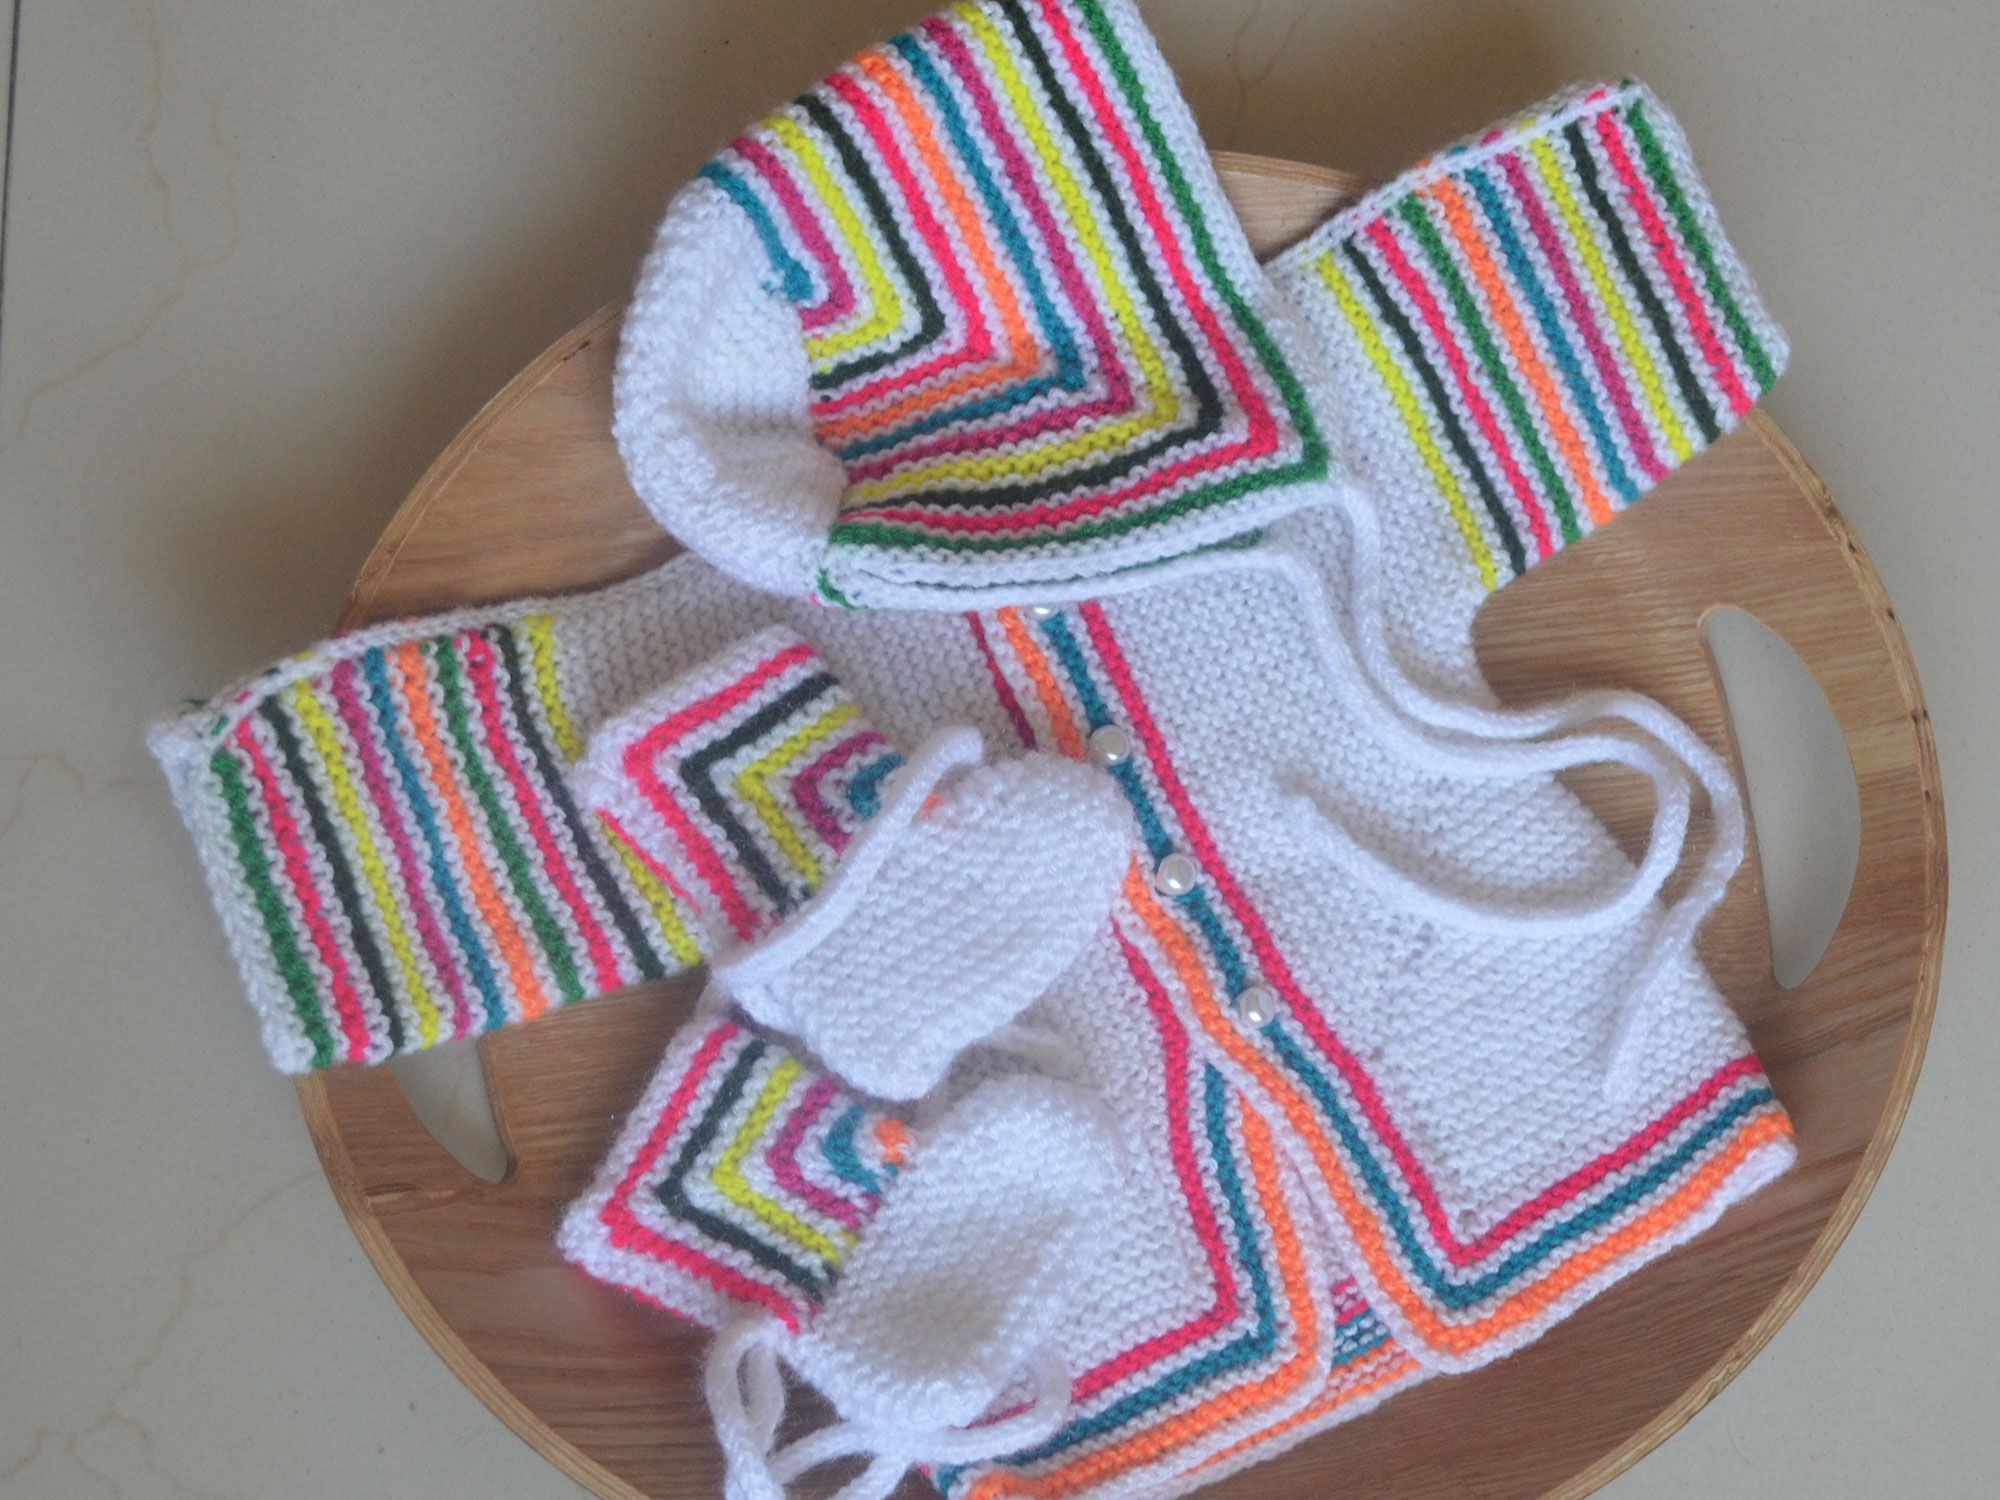 Free Knitting Patterns For Baby Sets Woollen Ba Set With Jacket White With Multi Colored Stripes